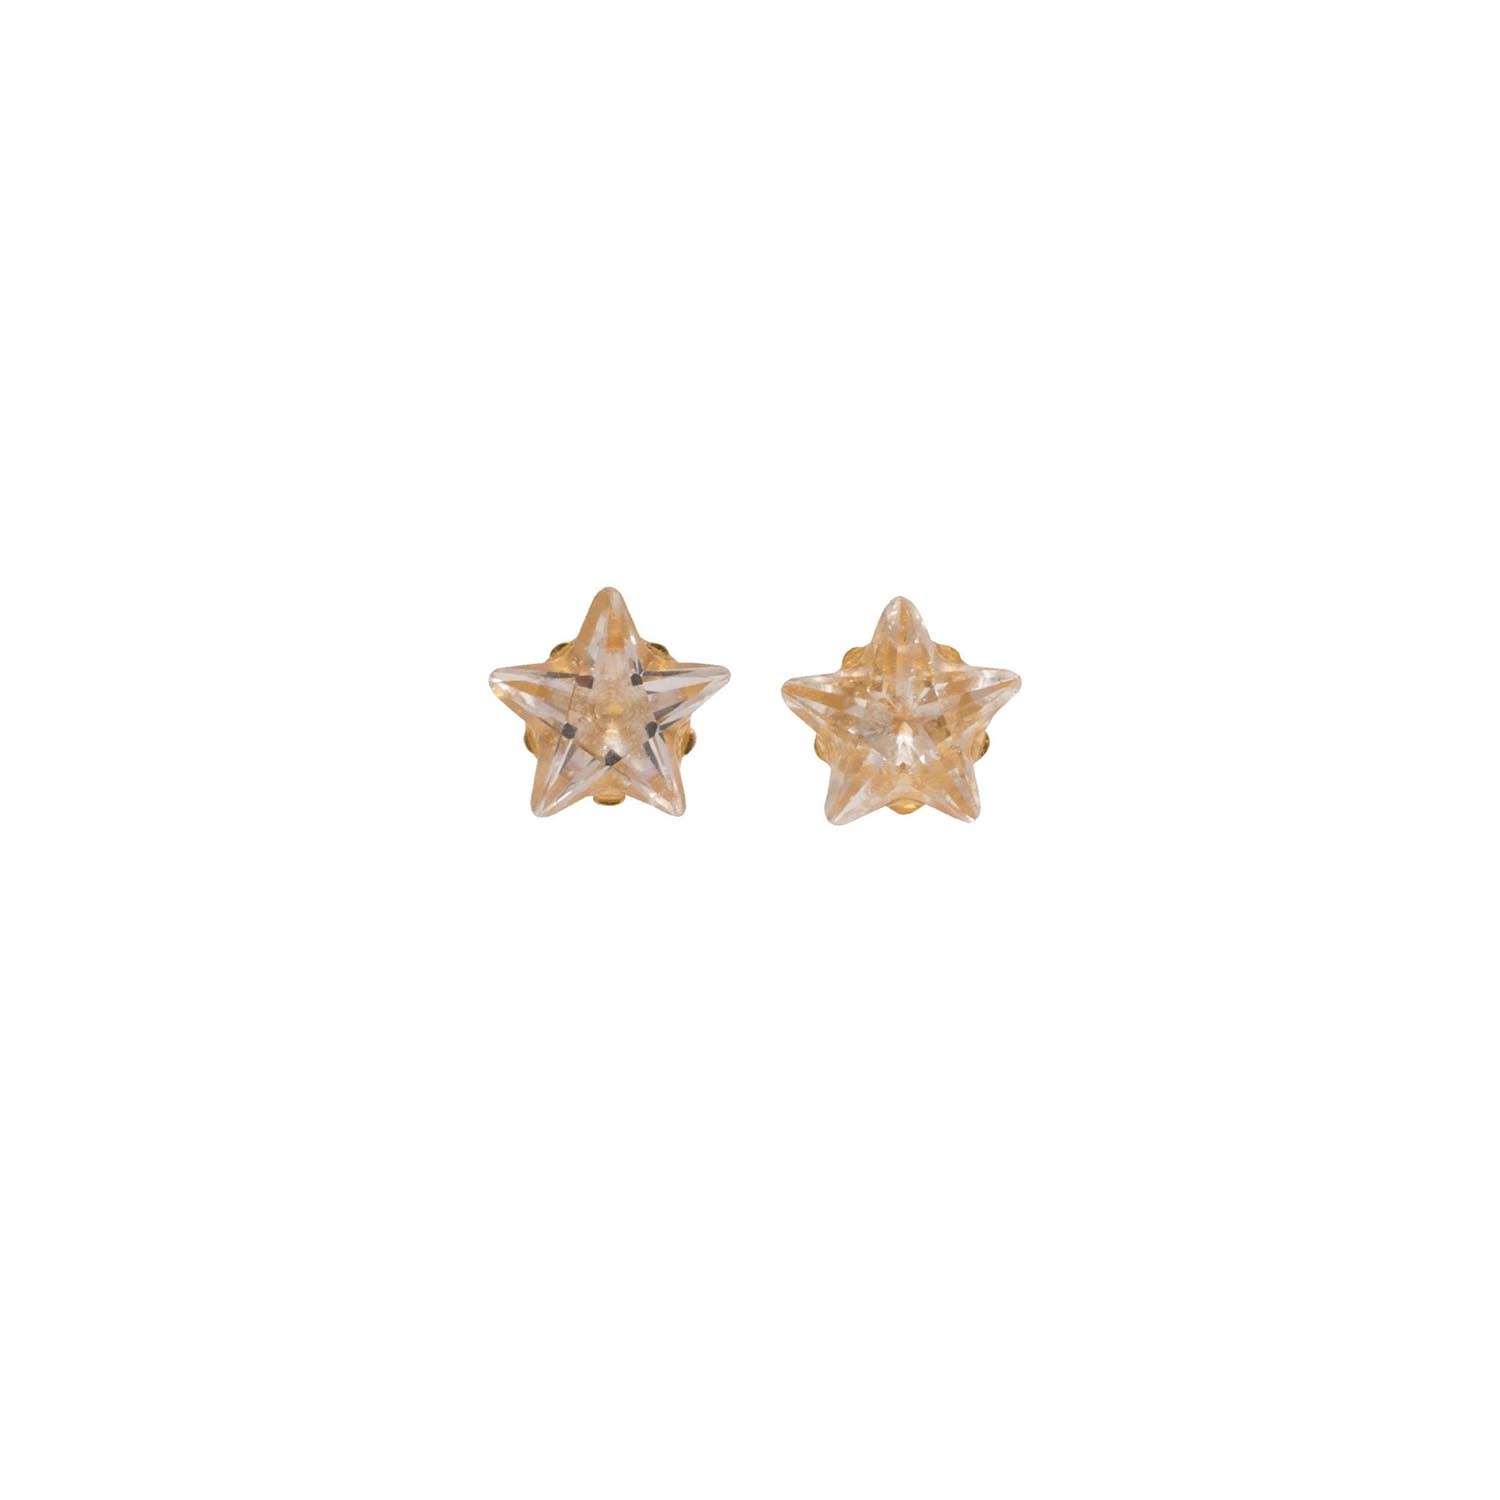 5MM - Tiffany Star - Cubic Zirconia - Crystal Clear | 24K Gold Plated Simple Yet Stylish, Cute & Trending Fashion Earrings / Ear Studs for Girls & Women Online @ Pakistan | Studex Sensitive (for daily wear)